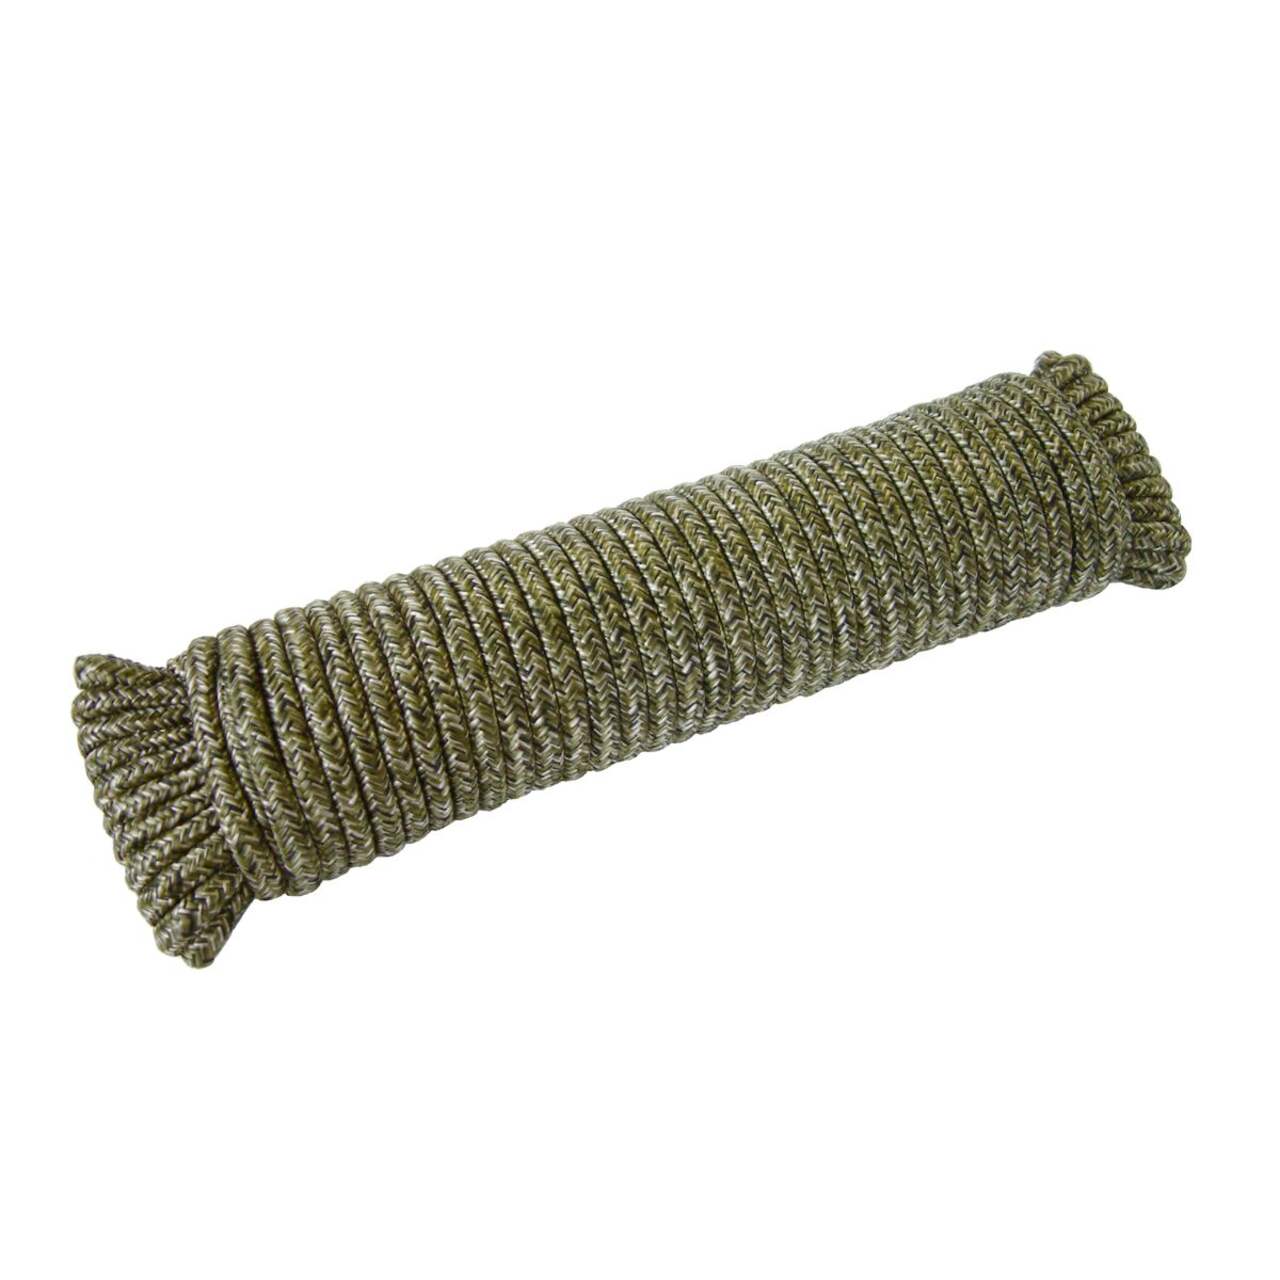 https://media-www.canadiantire.ca/product/fixing/hardware/general-hardware/0618591/3-8-x-100-camouflage-military-utility-rope-03ae9944-6f72-4ba6-b705-31861b58fb0b-jpgrendition.jpg?imdensity=1&imwidth=1244&impolicy=mZoom